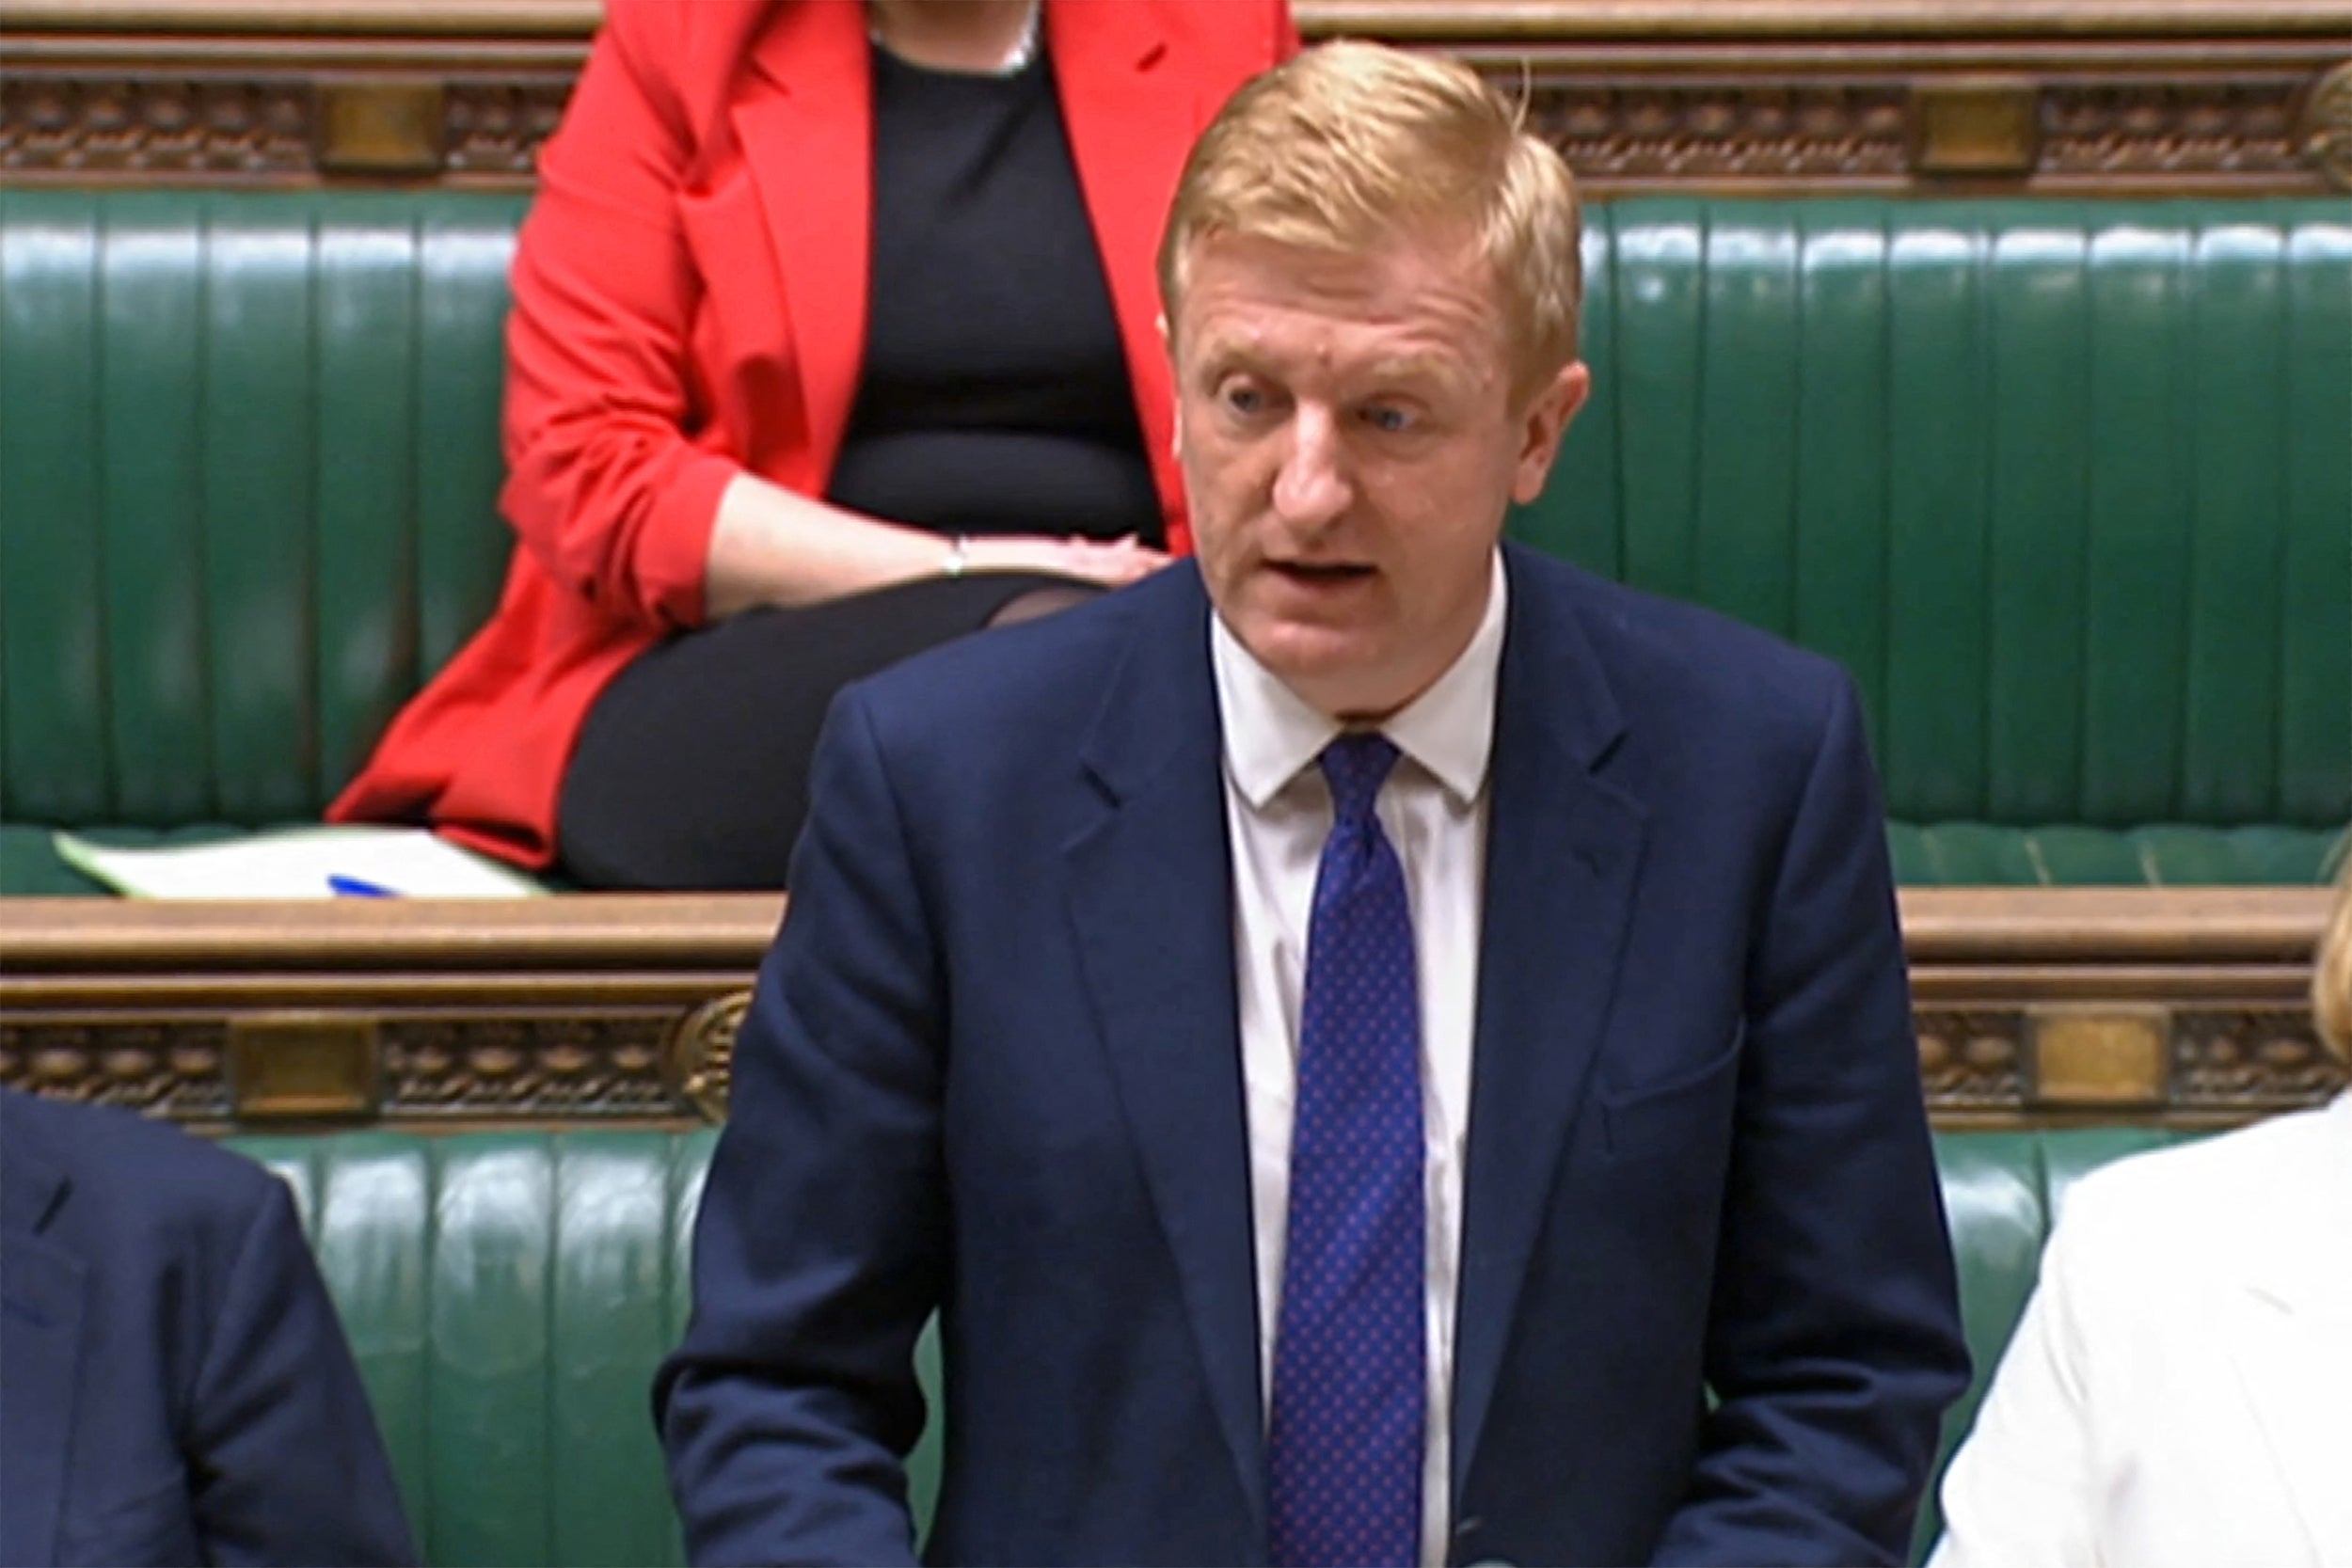 In March, deputy prime minister Oliver Dowden said the Electoral Commission and MPs were targeted in a cyberattack by Chinese companies